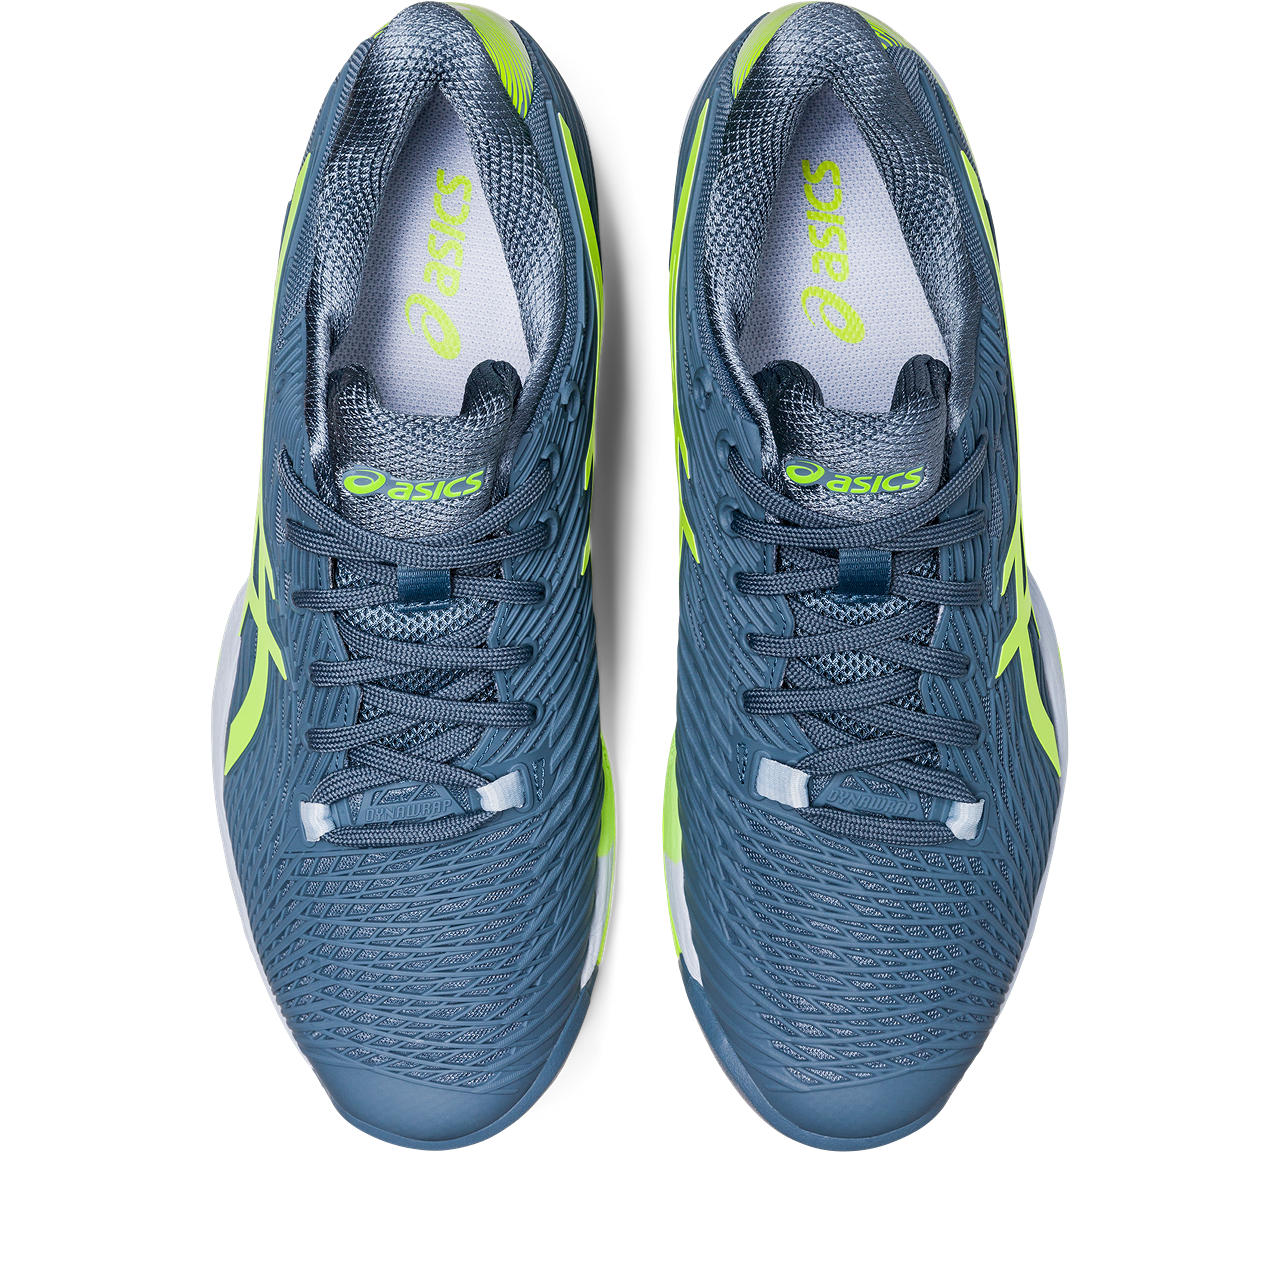 Top view of the Men's Solution Speed FF 2 tennis shoe by ASIC in the color Steel Blue/Hazard Green